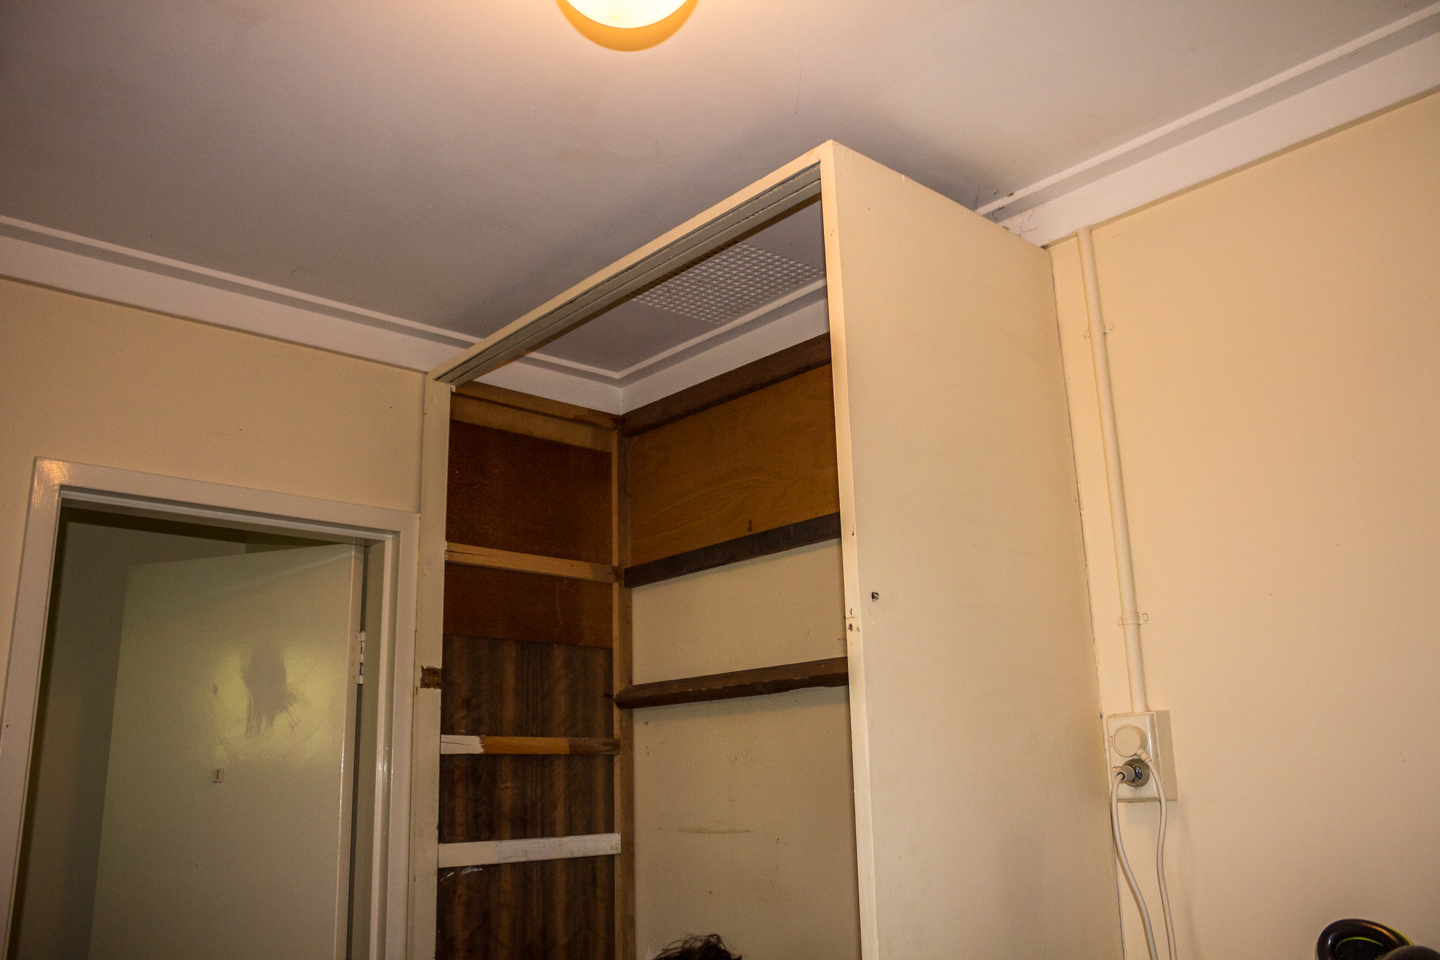 26/12/15 Day 1: The shell of the old cupboard to be demolished